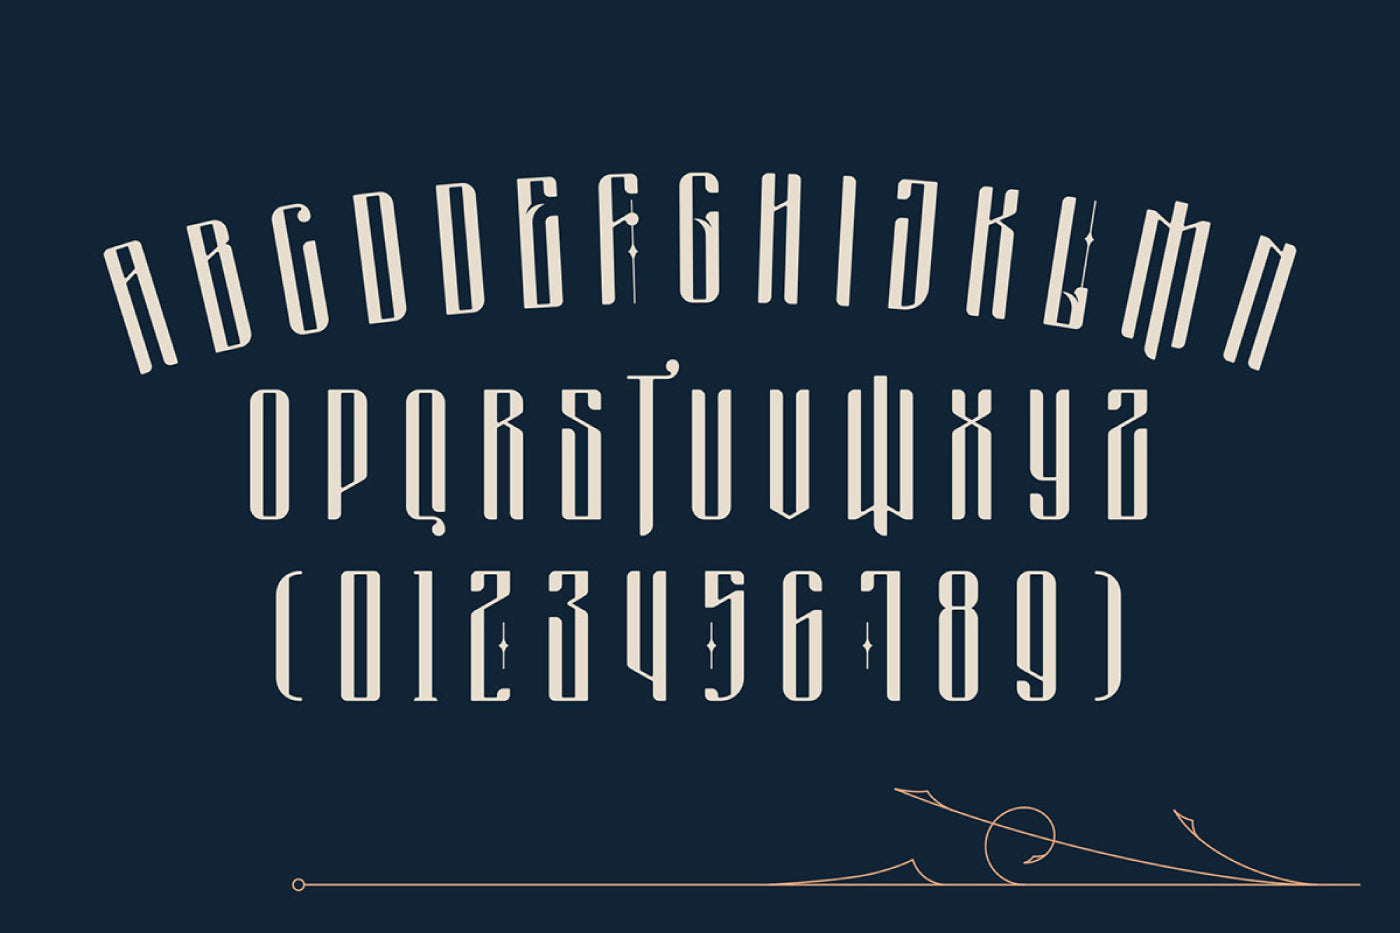 Masquerouge - Free Victorian Display Font